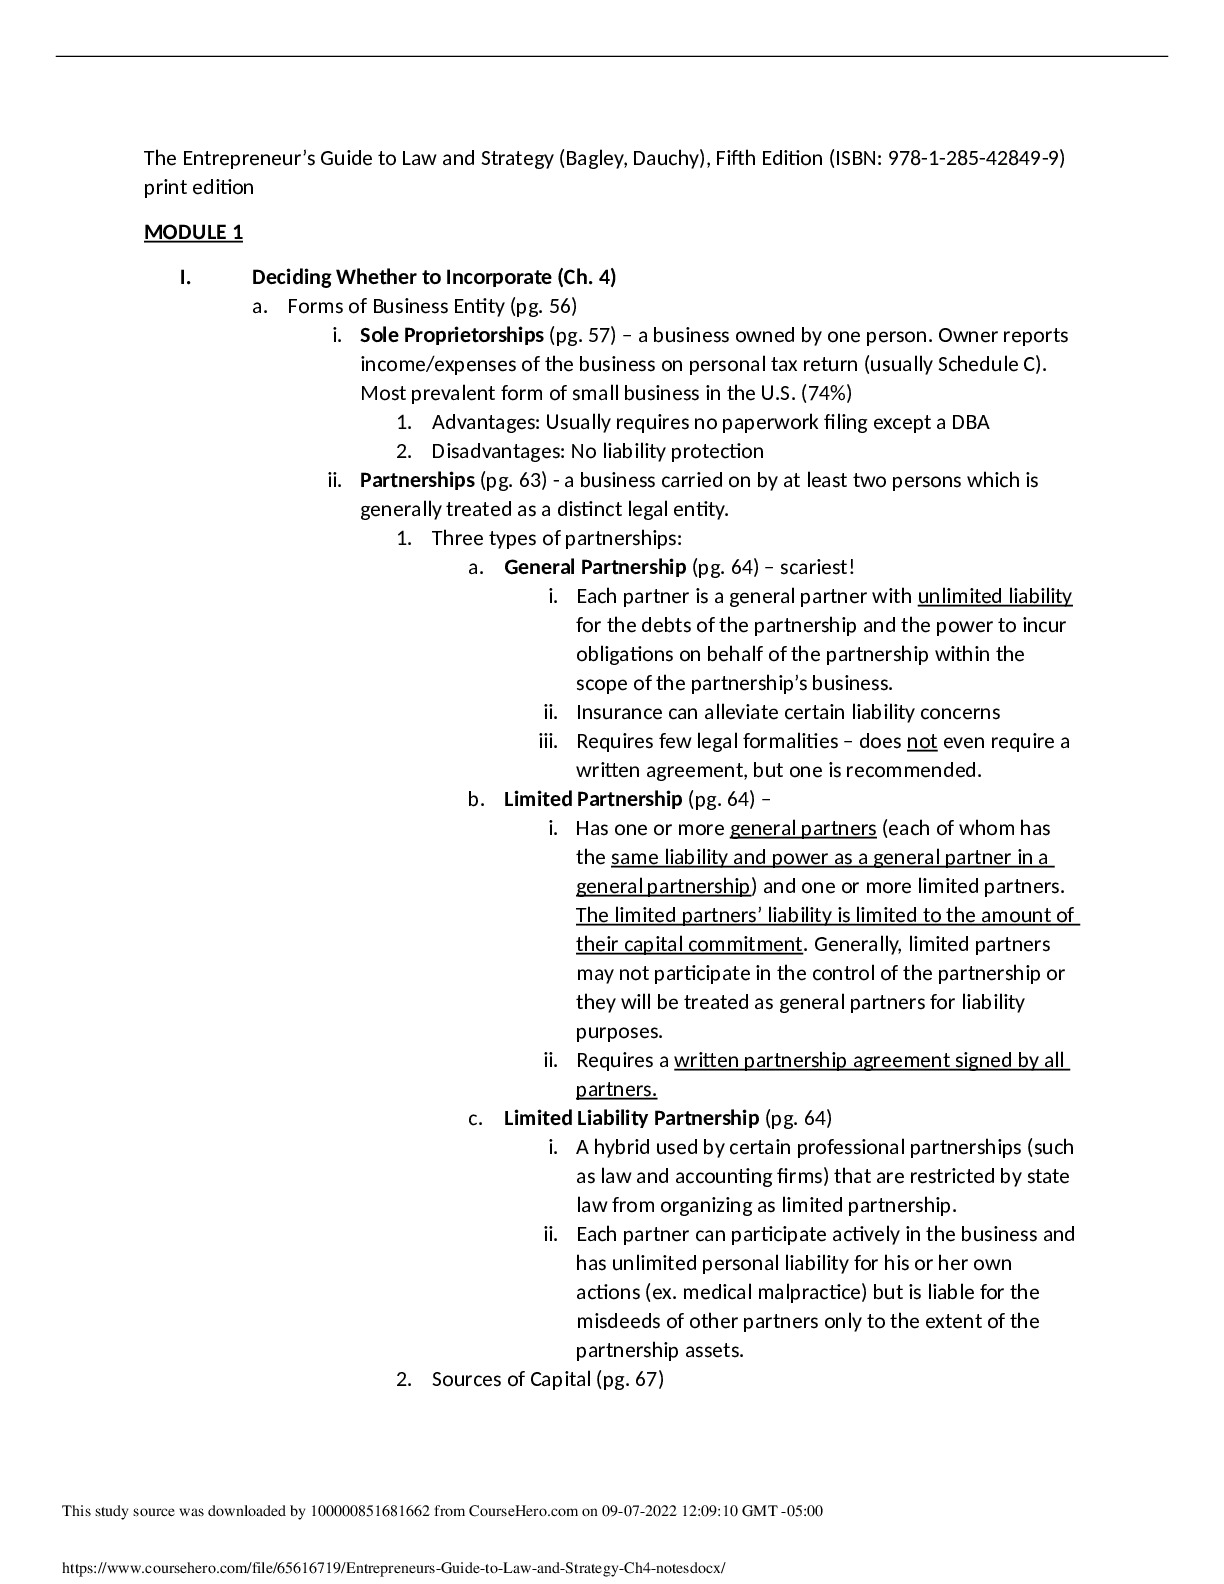 Entrepreneur_s_Guide_to_Law_and_Strategy___Ch4_notes.docx